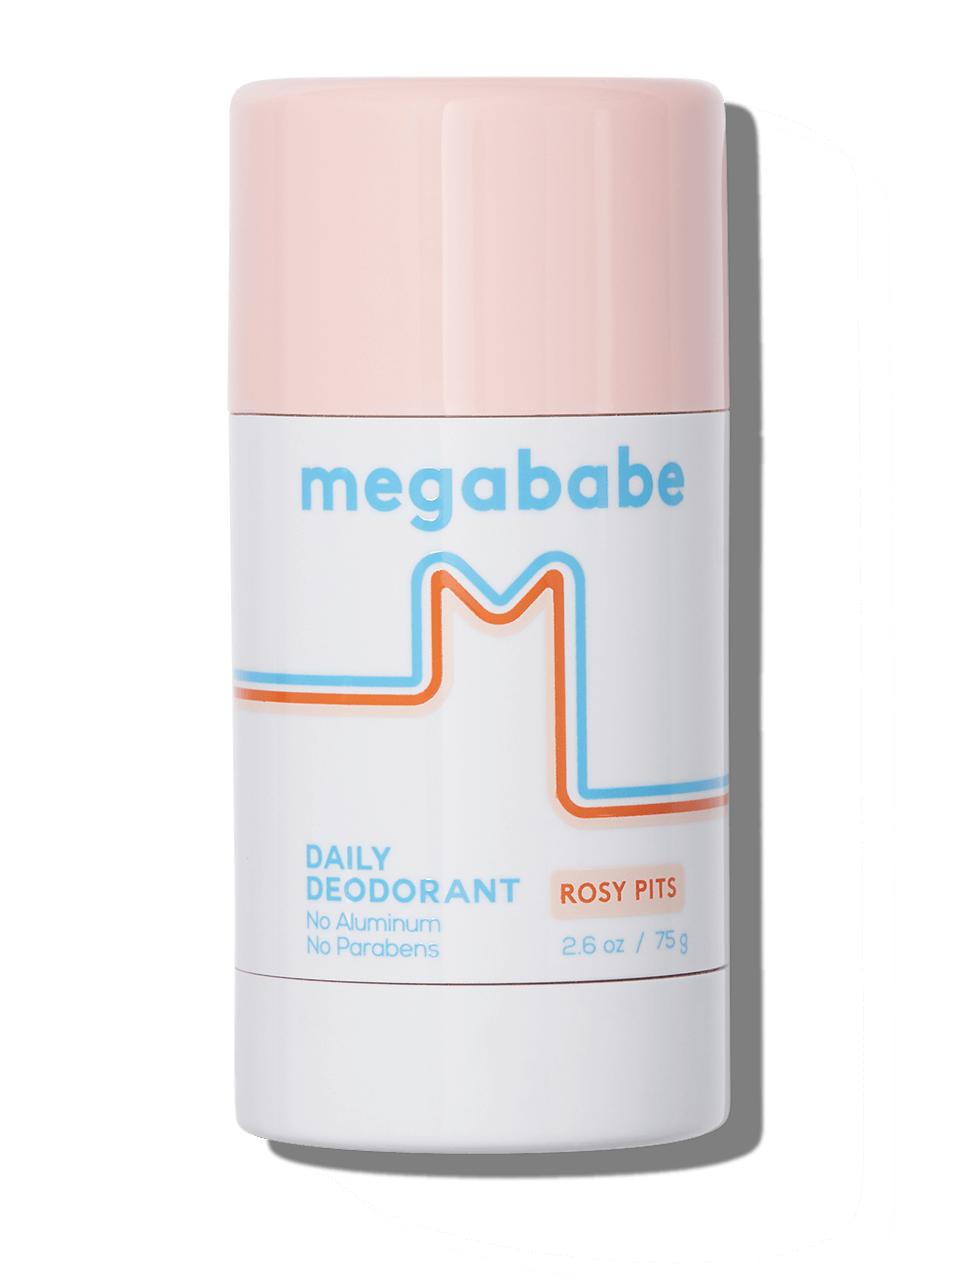 Rosy Pits Daily Deodorant BODY CARE Megababe 